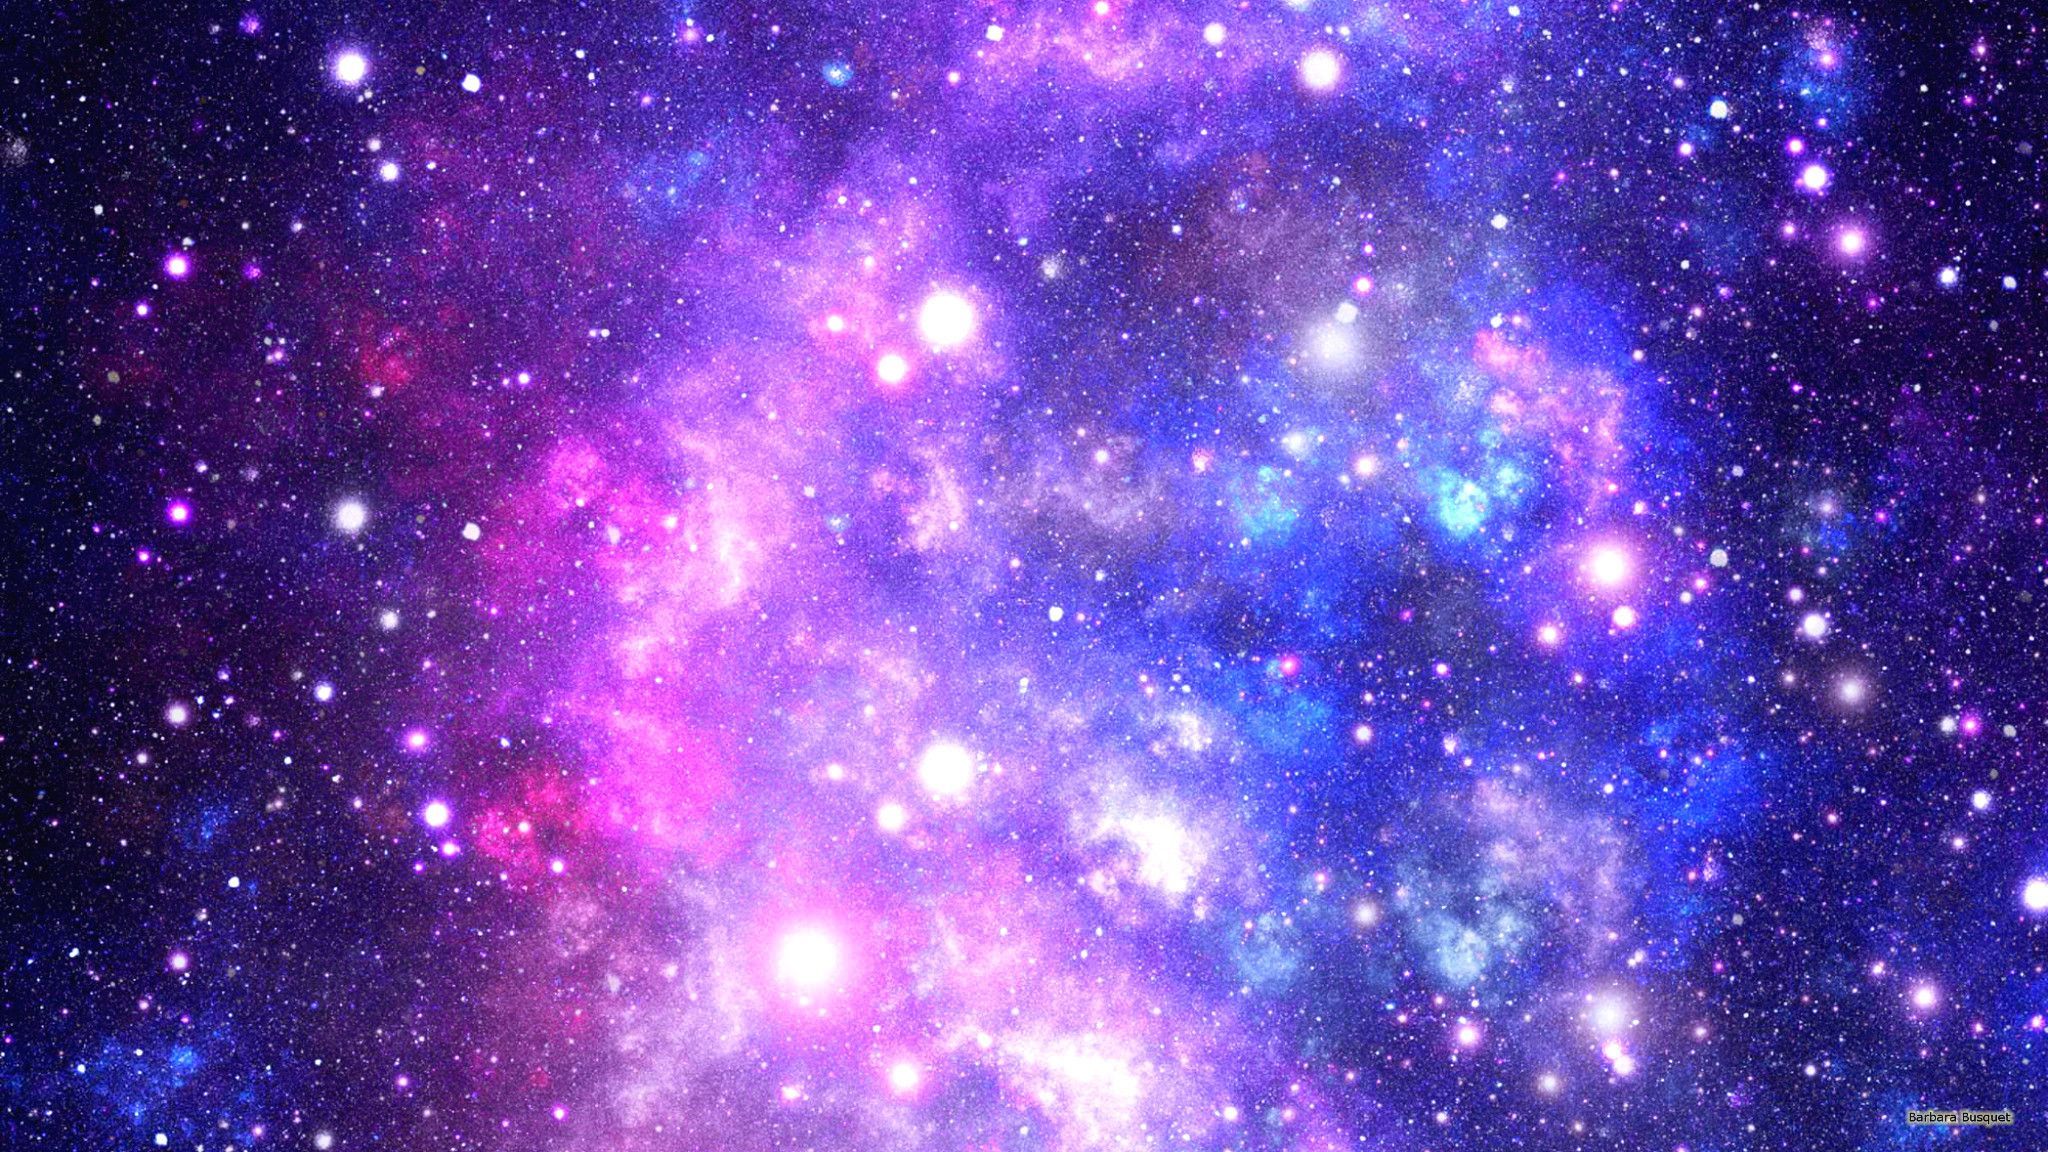 Colorful Galaxy Computer Wallpapers Wallpaper Cave